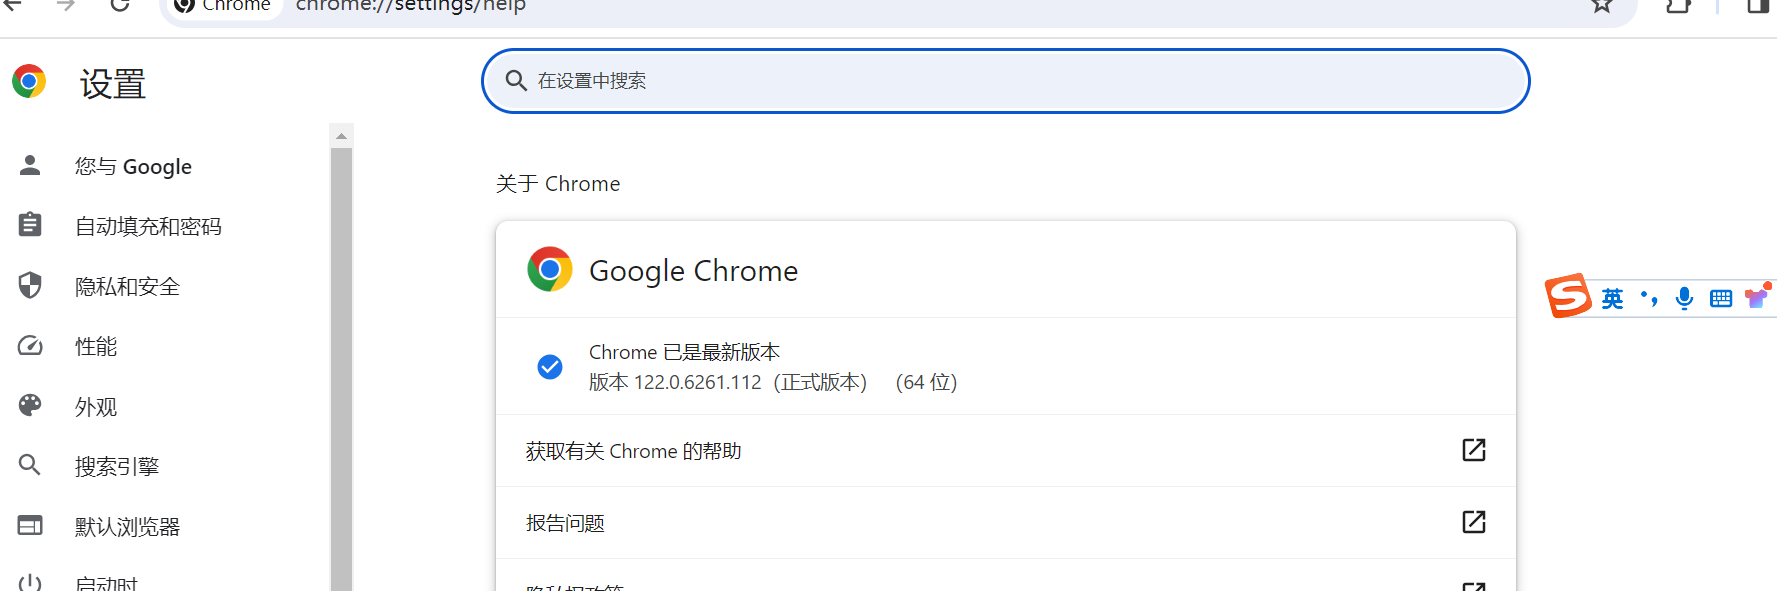 <span style='color:red;'>下载</span><span style='color:red;'>chromedrive</span>，使用自动化